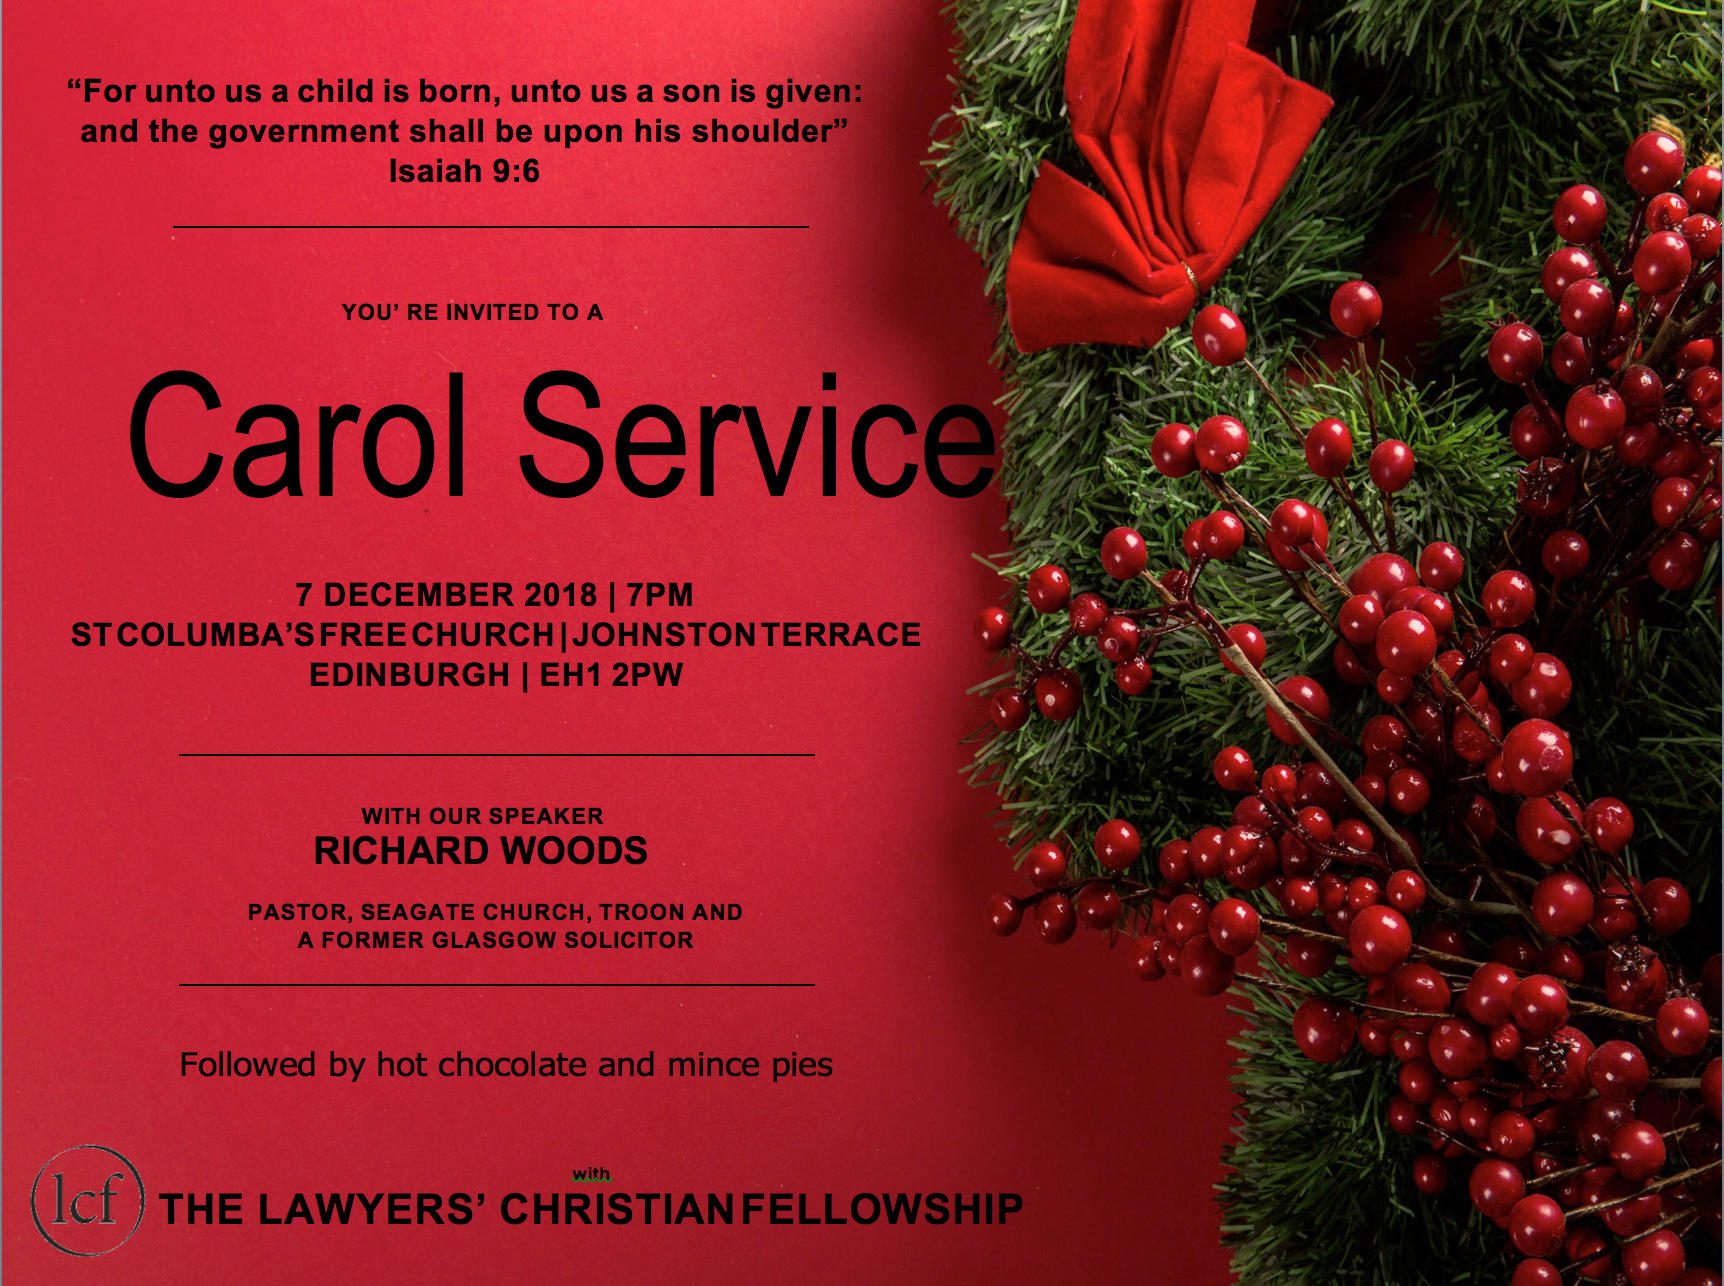 The Lawyers' Christian Fellowship hosts carol service this Friday